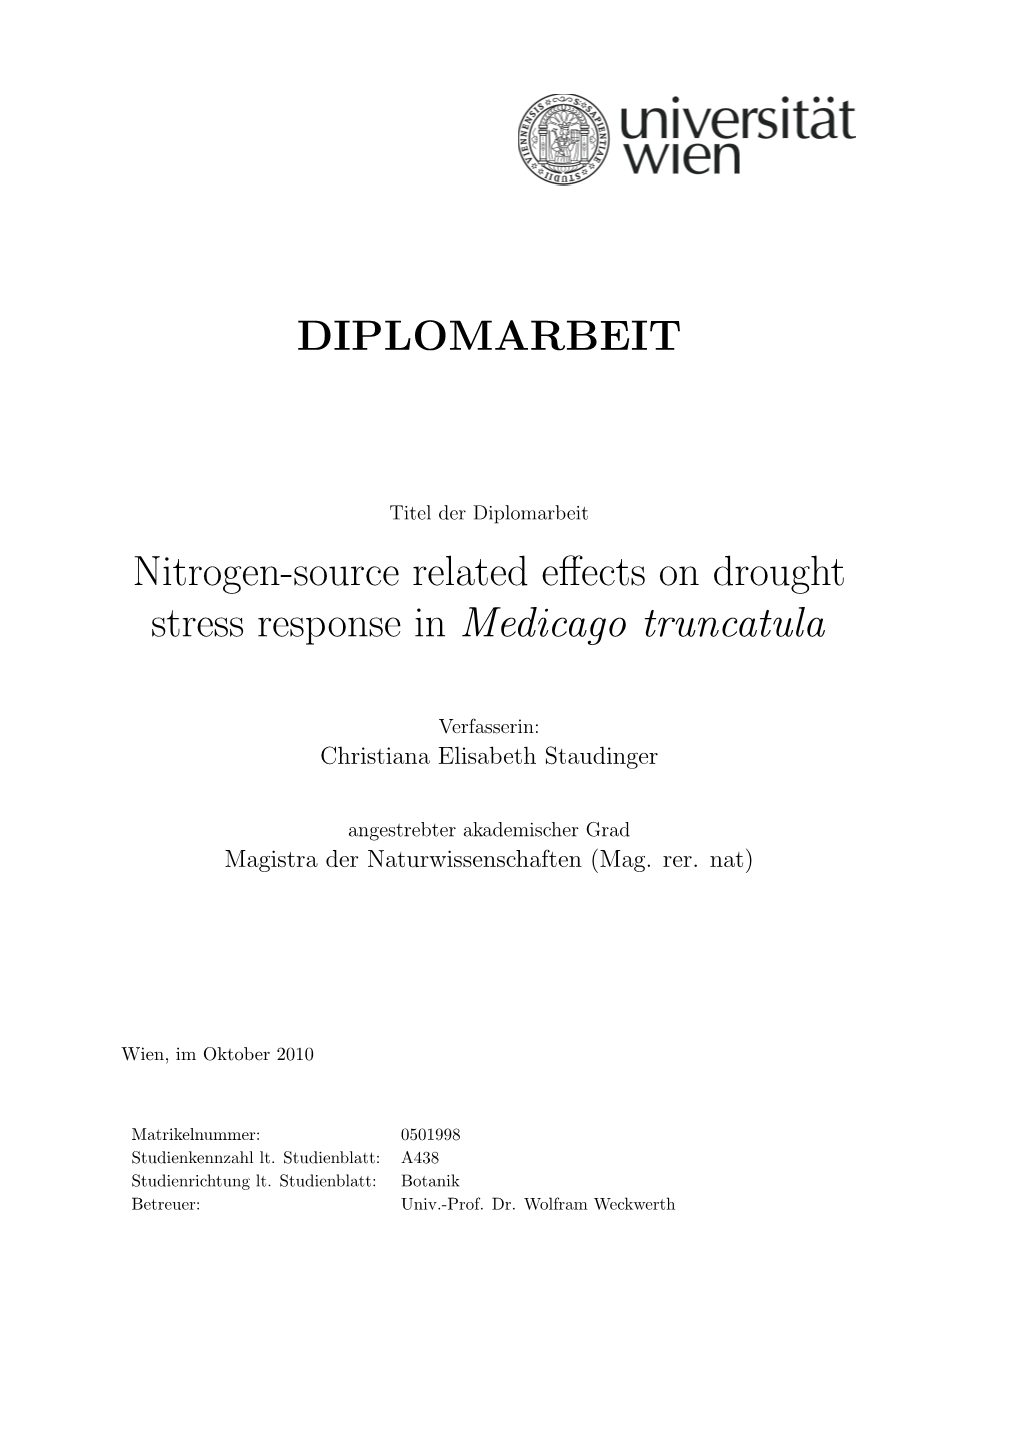 DIPLOMARBEIT Nitrogen-Source Related Effects on Drought Stress